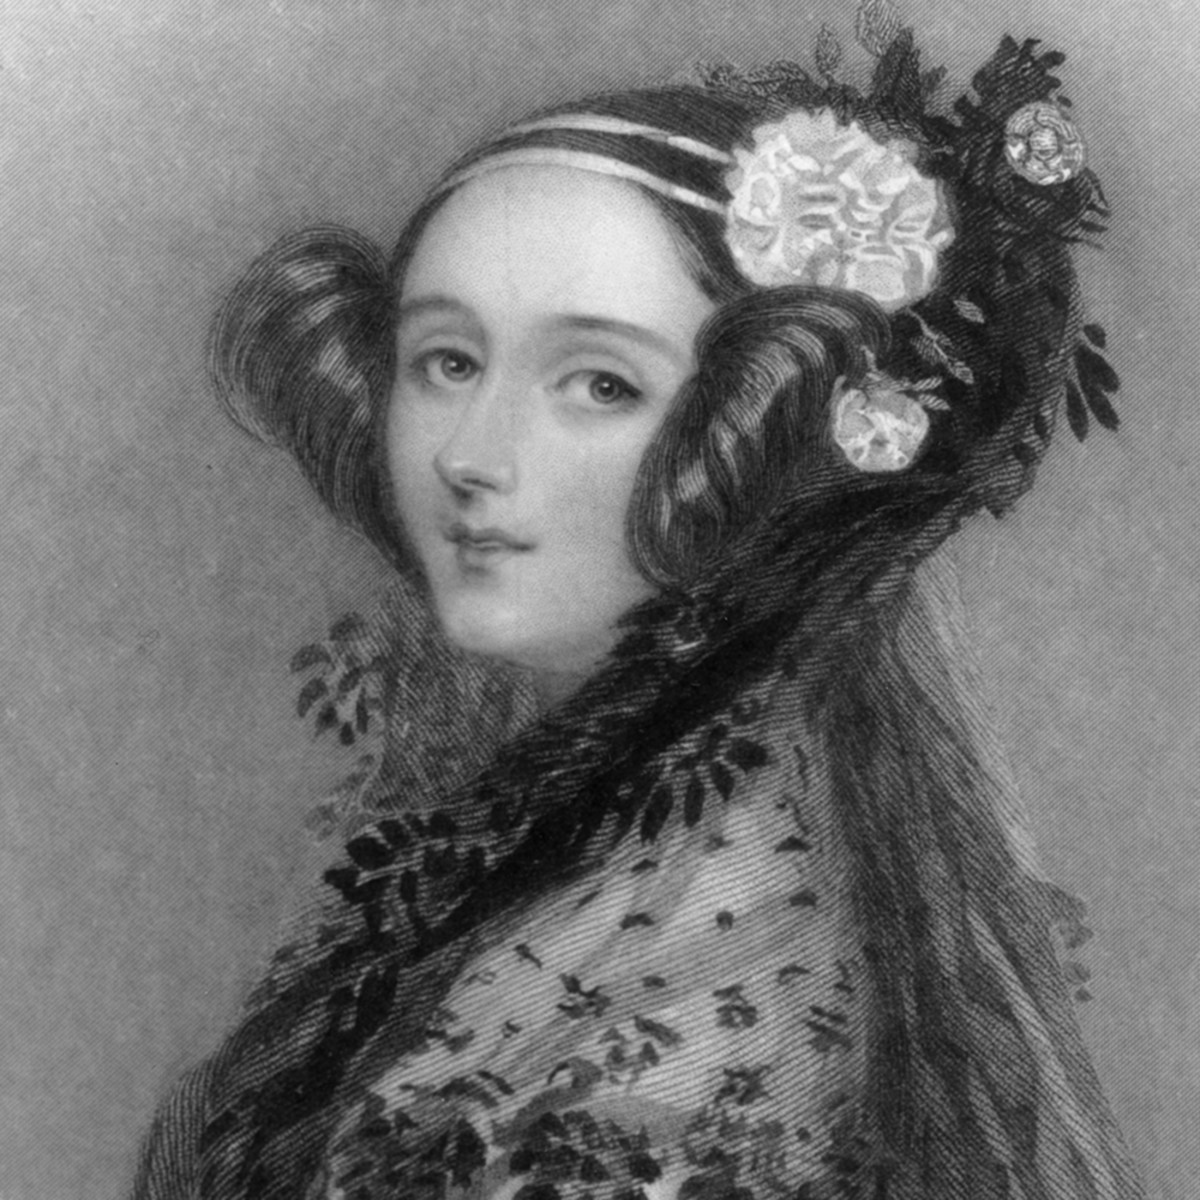 Happy Ada Lovelace Day 🥳 @adaventures was named after Ada Lovelace, the female mathematician who pioneered the world's first algorithm but went unrecognised for her achievements in her time. You can learn more: findingada.com